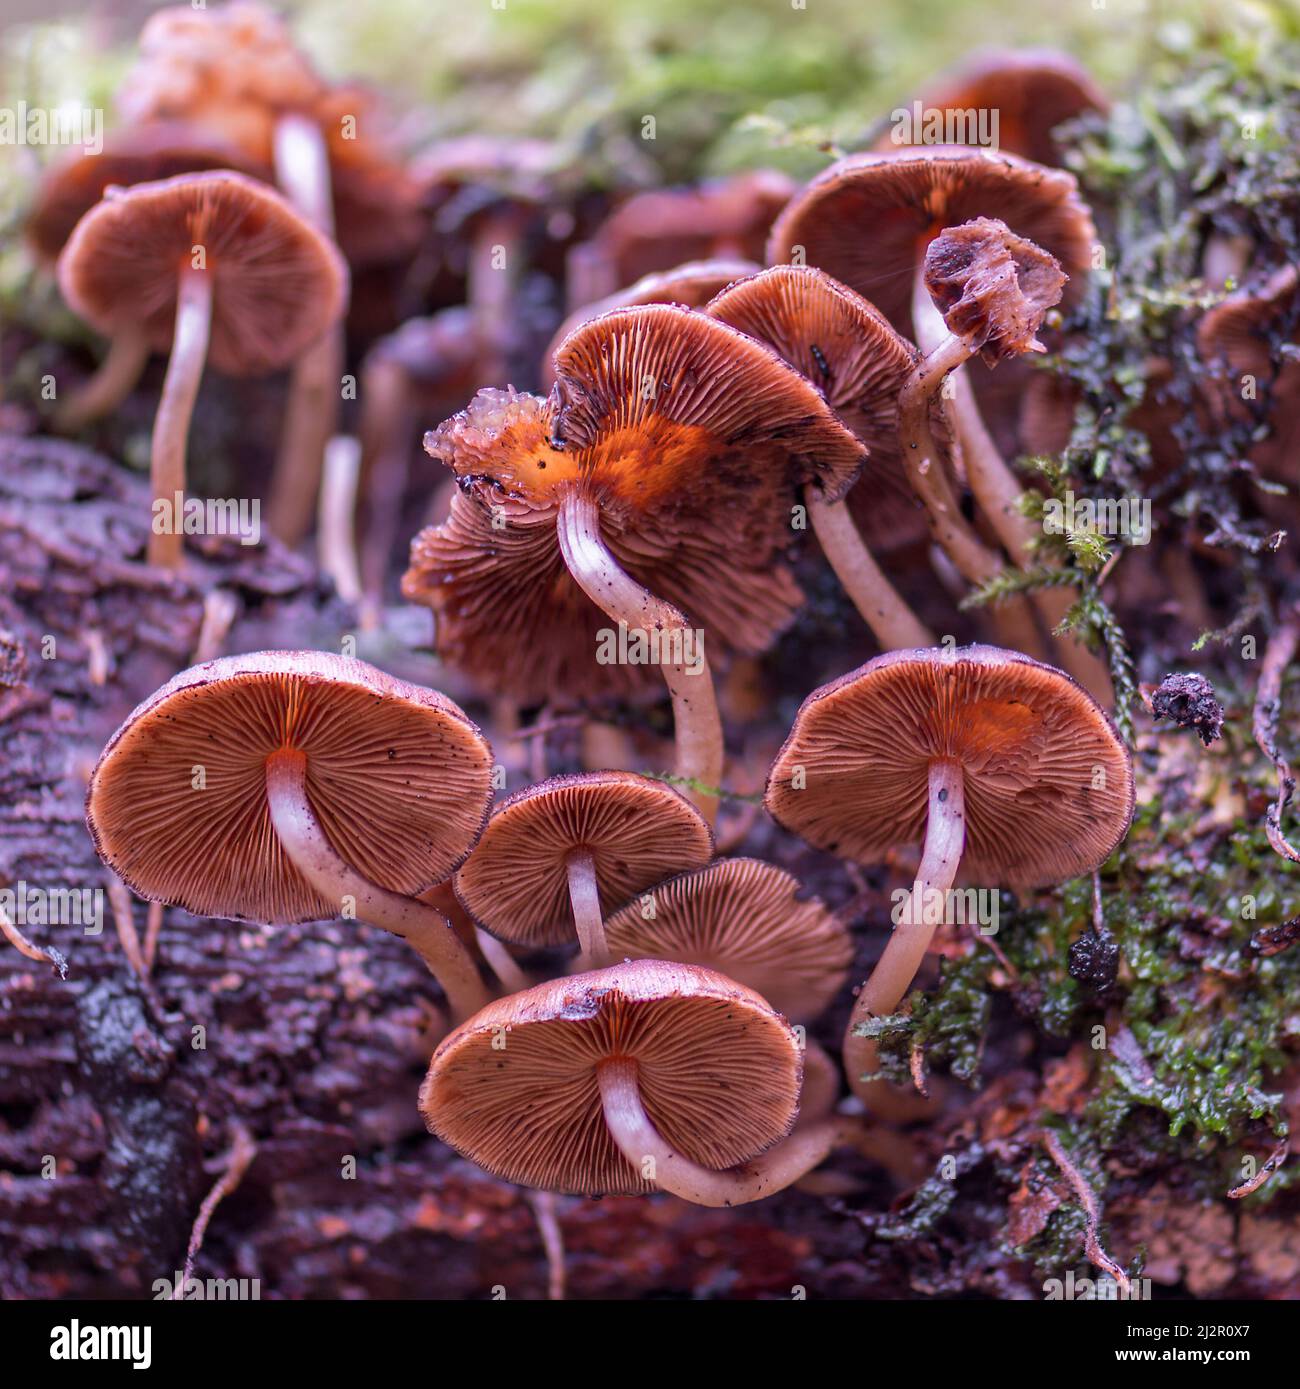 Fungi growing on dead logs in the woods at Hodders Coombe near Holford on the Quantock Hills, Somerset, England, UK Stock Photo